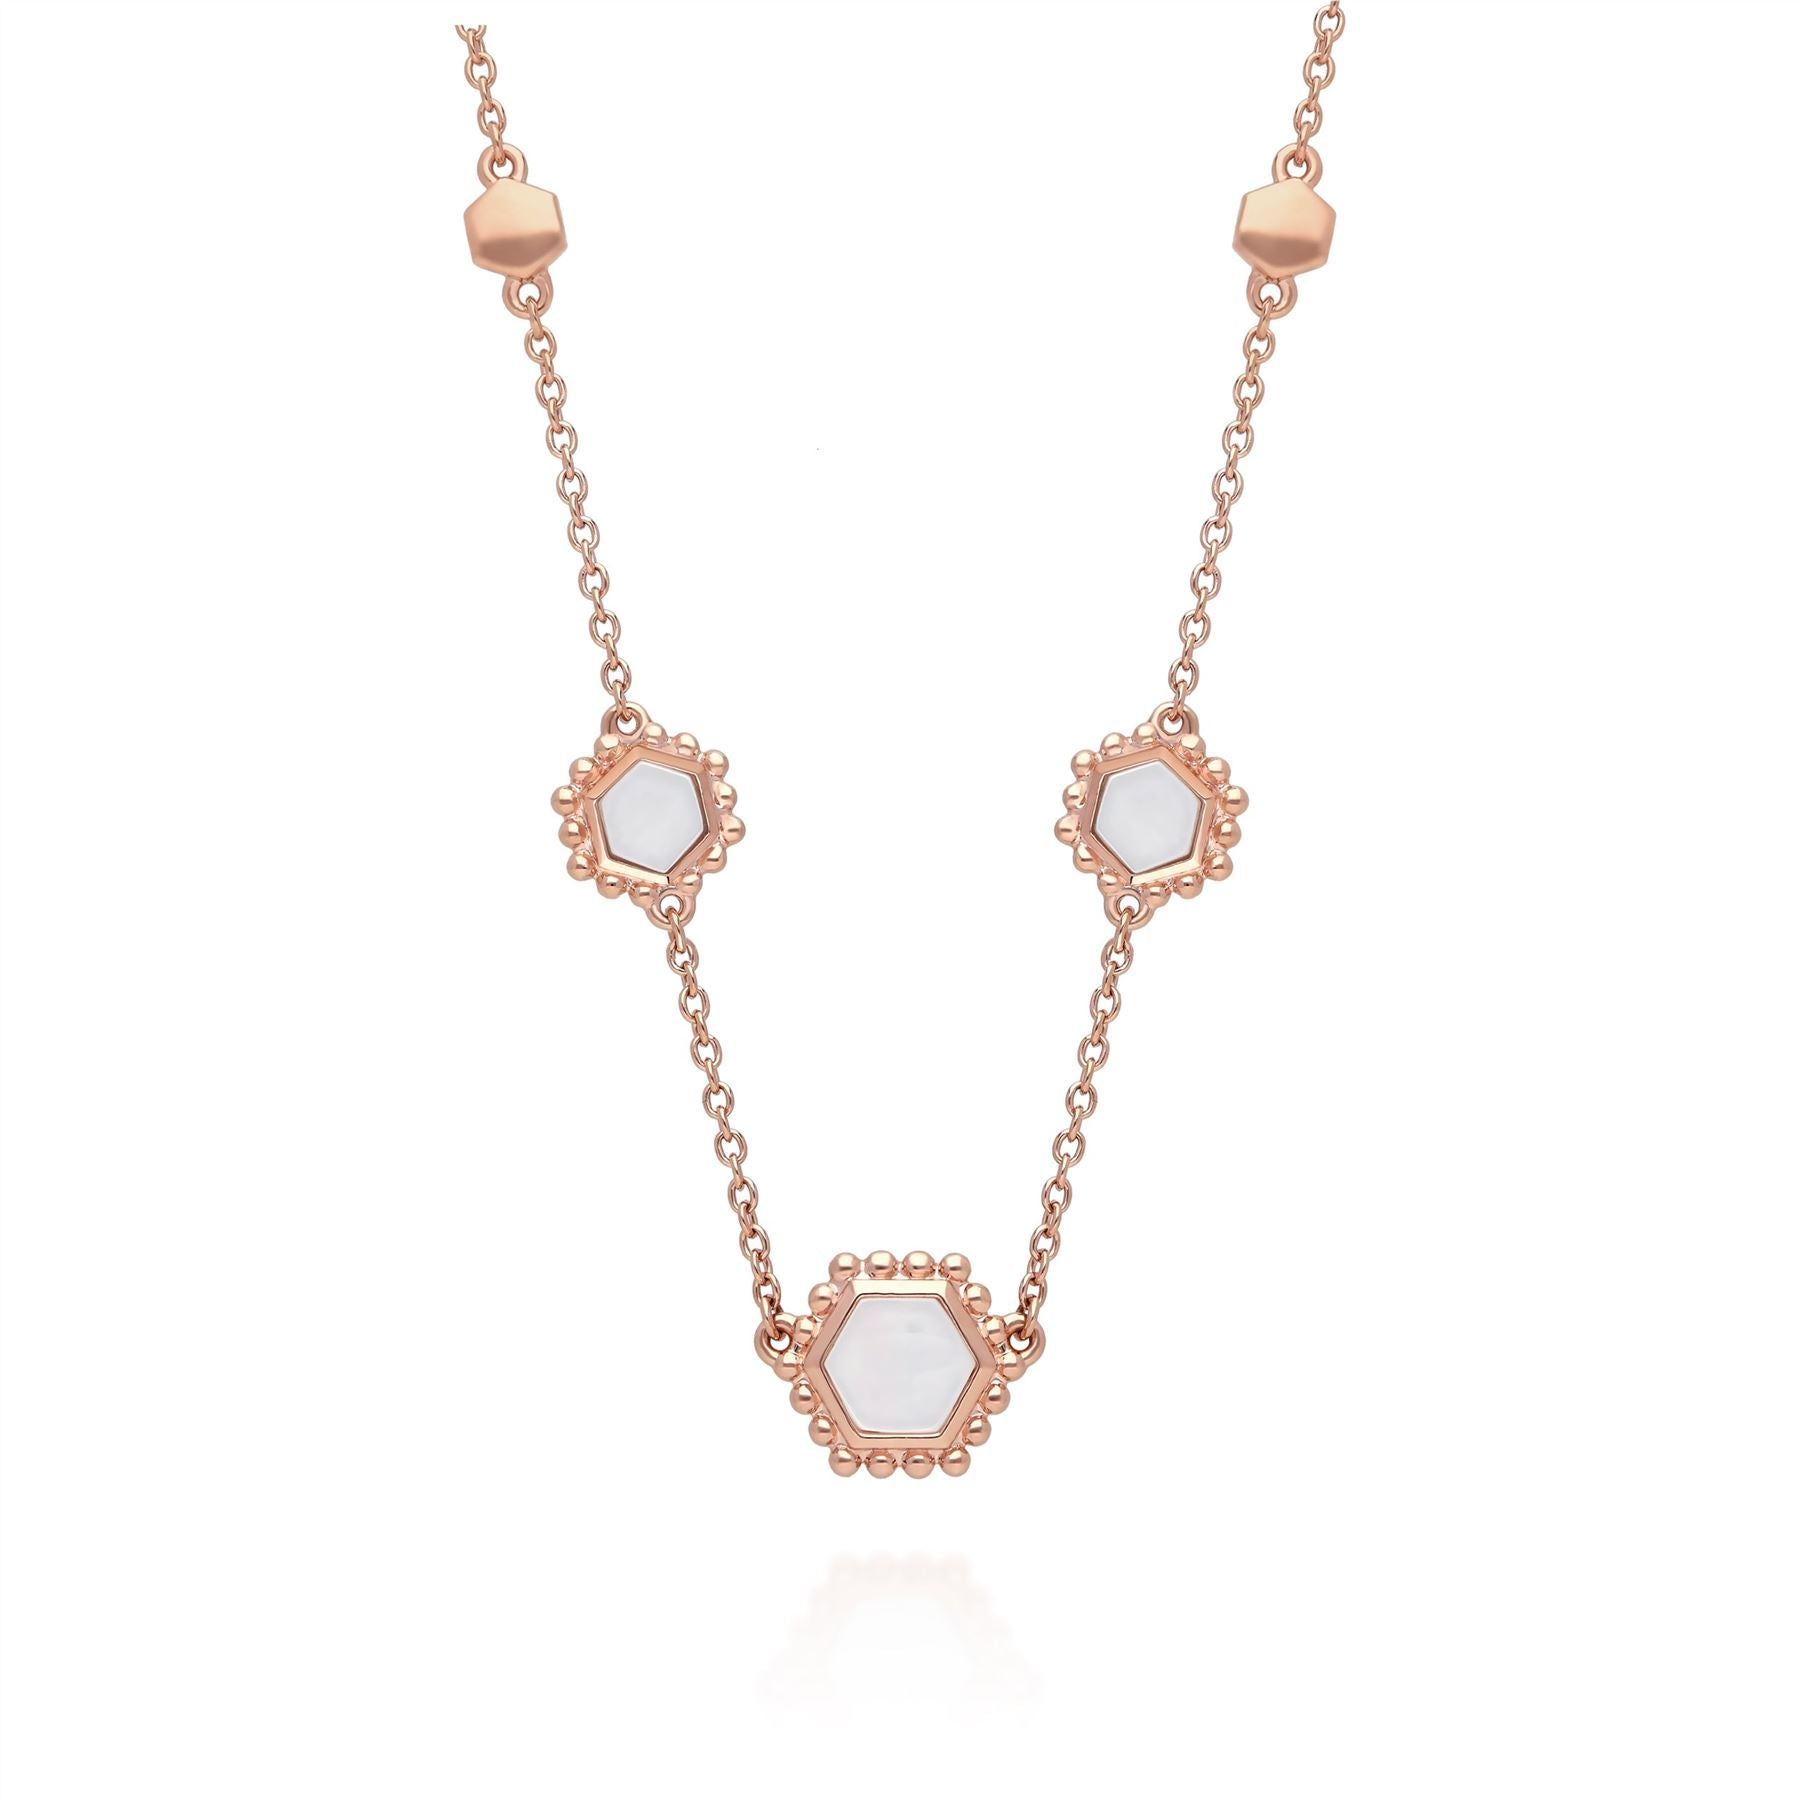 Mother of Pearl Slice Chain Necklace in Rose Gold Plated Sterling Silver